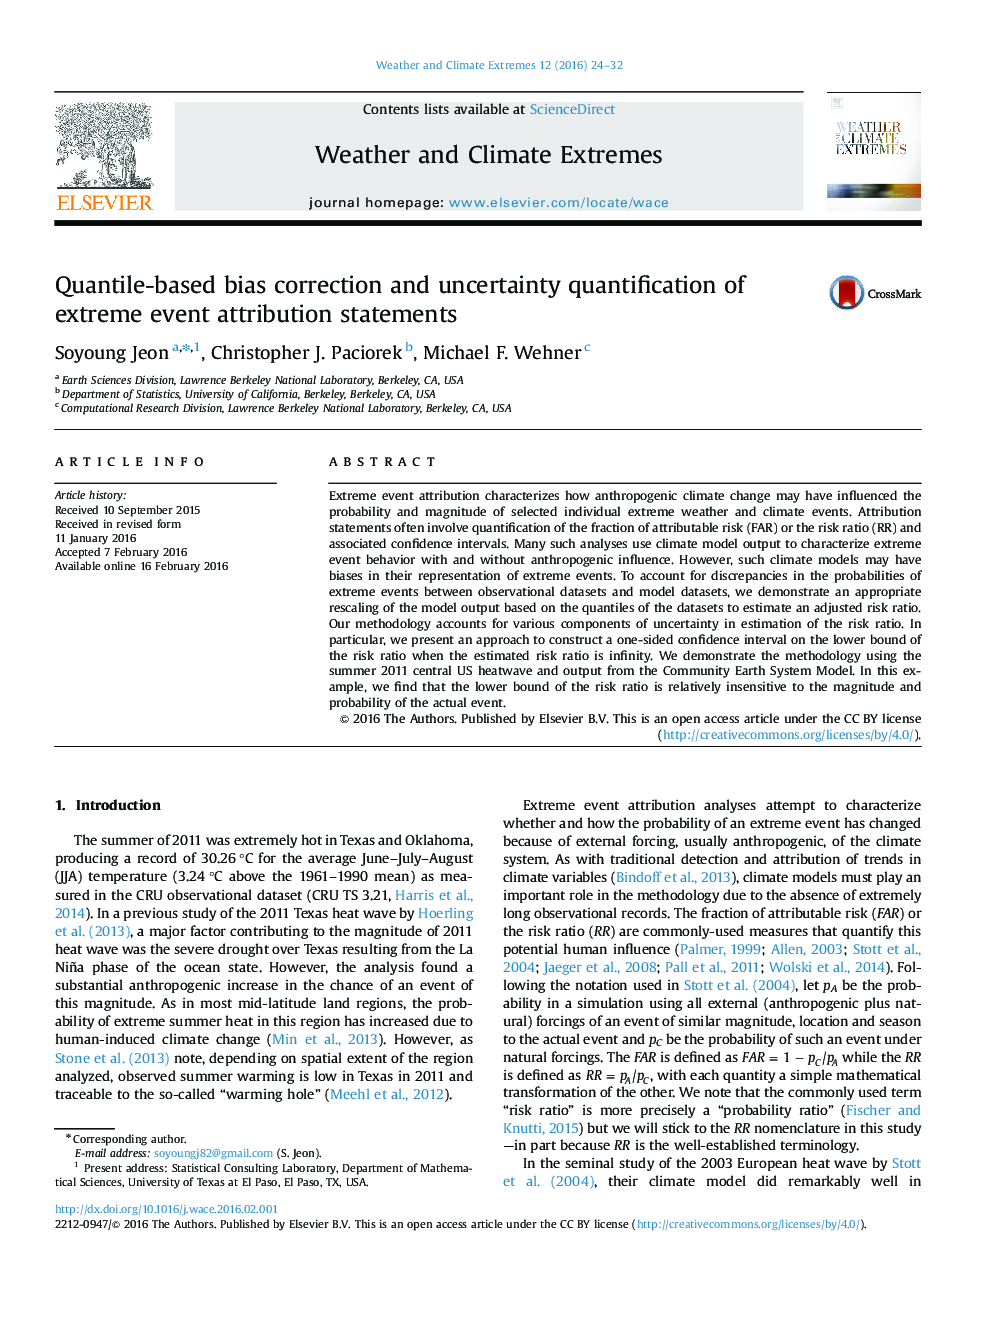 Quantile-based bias correction and uncertainty quantification of extreme event attribution statements